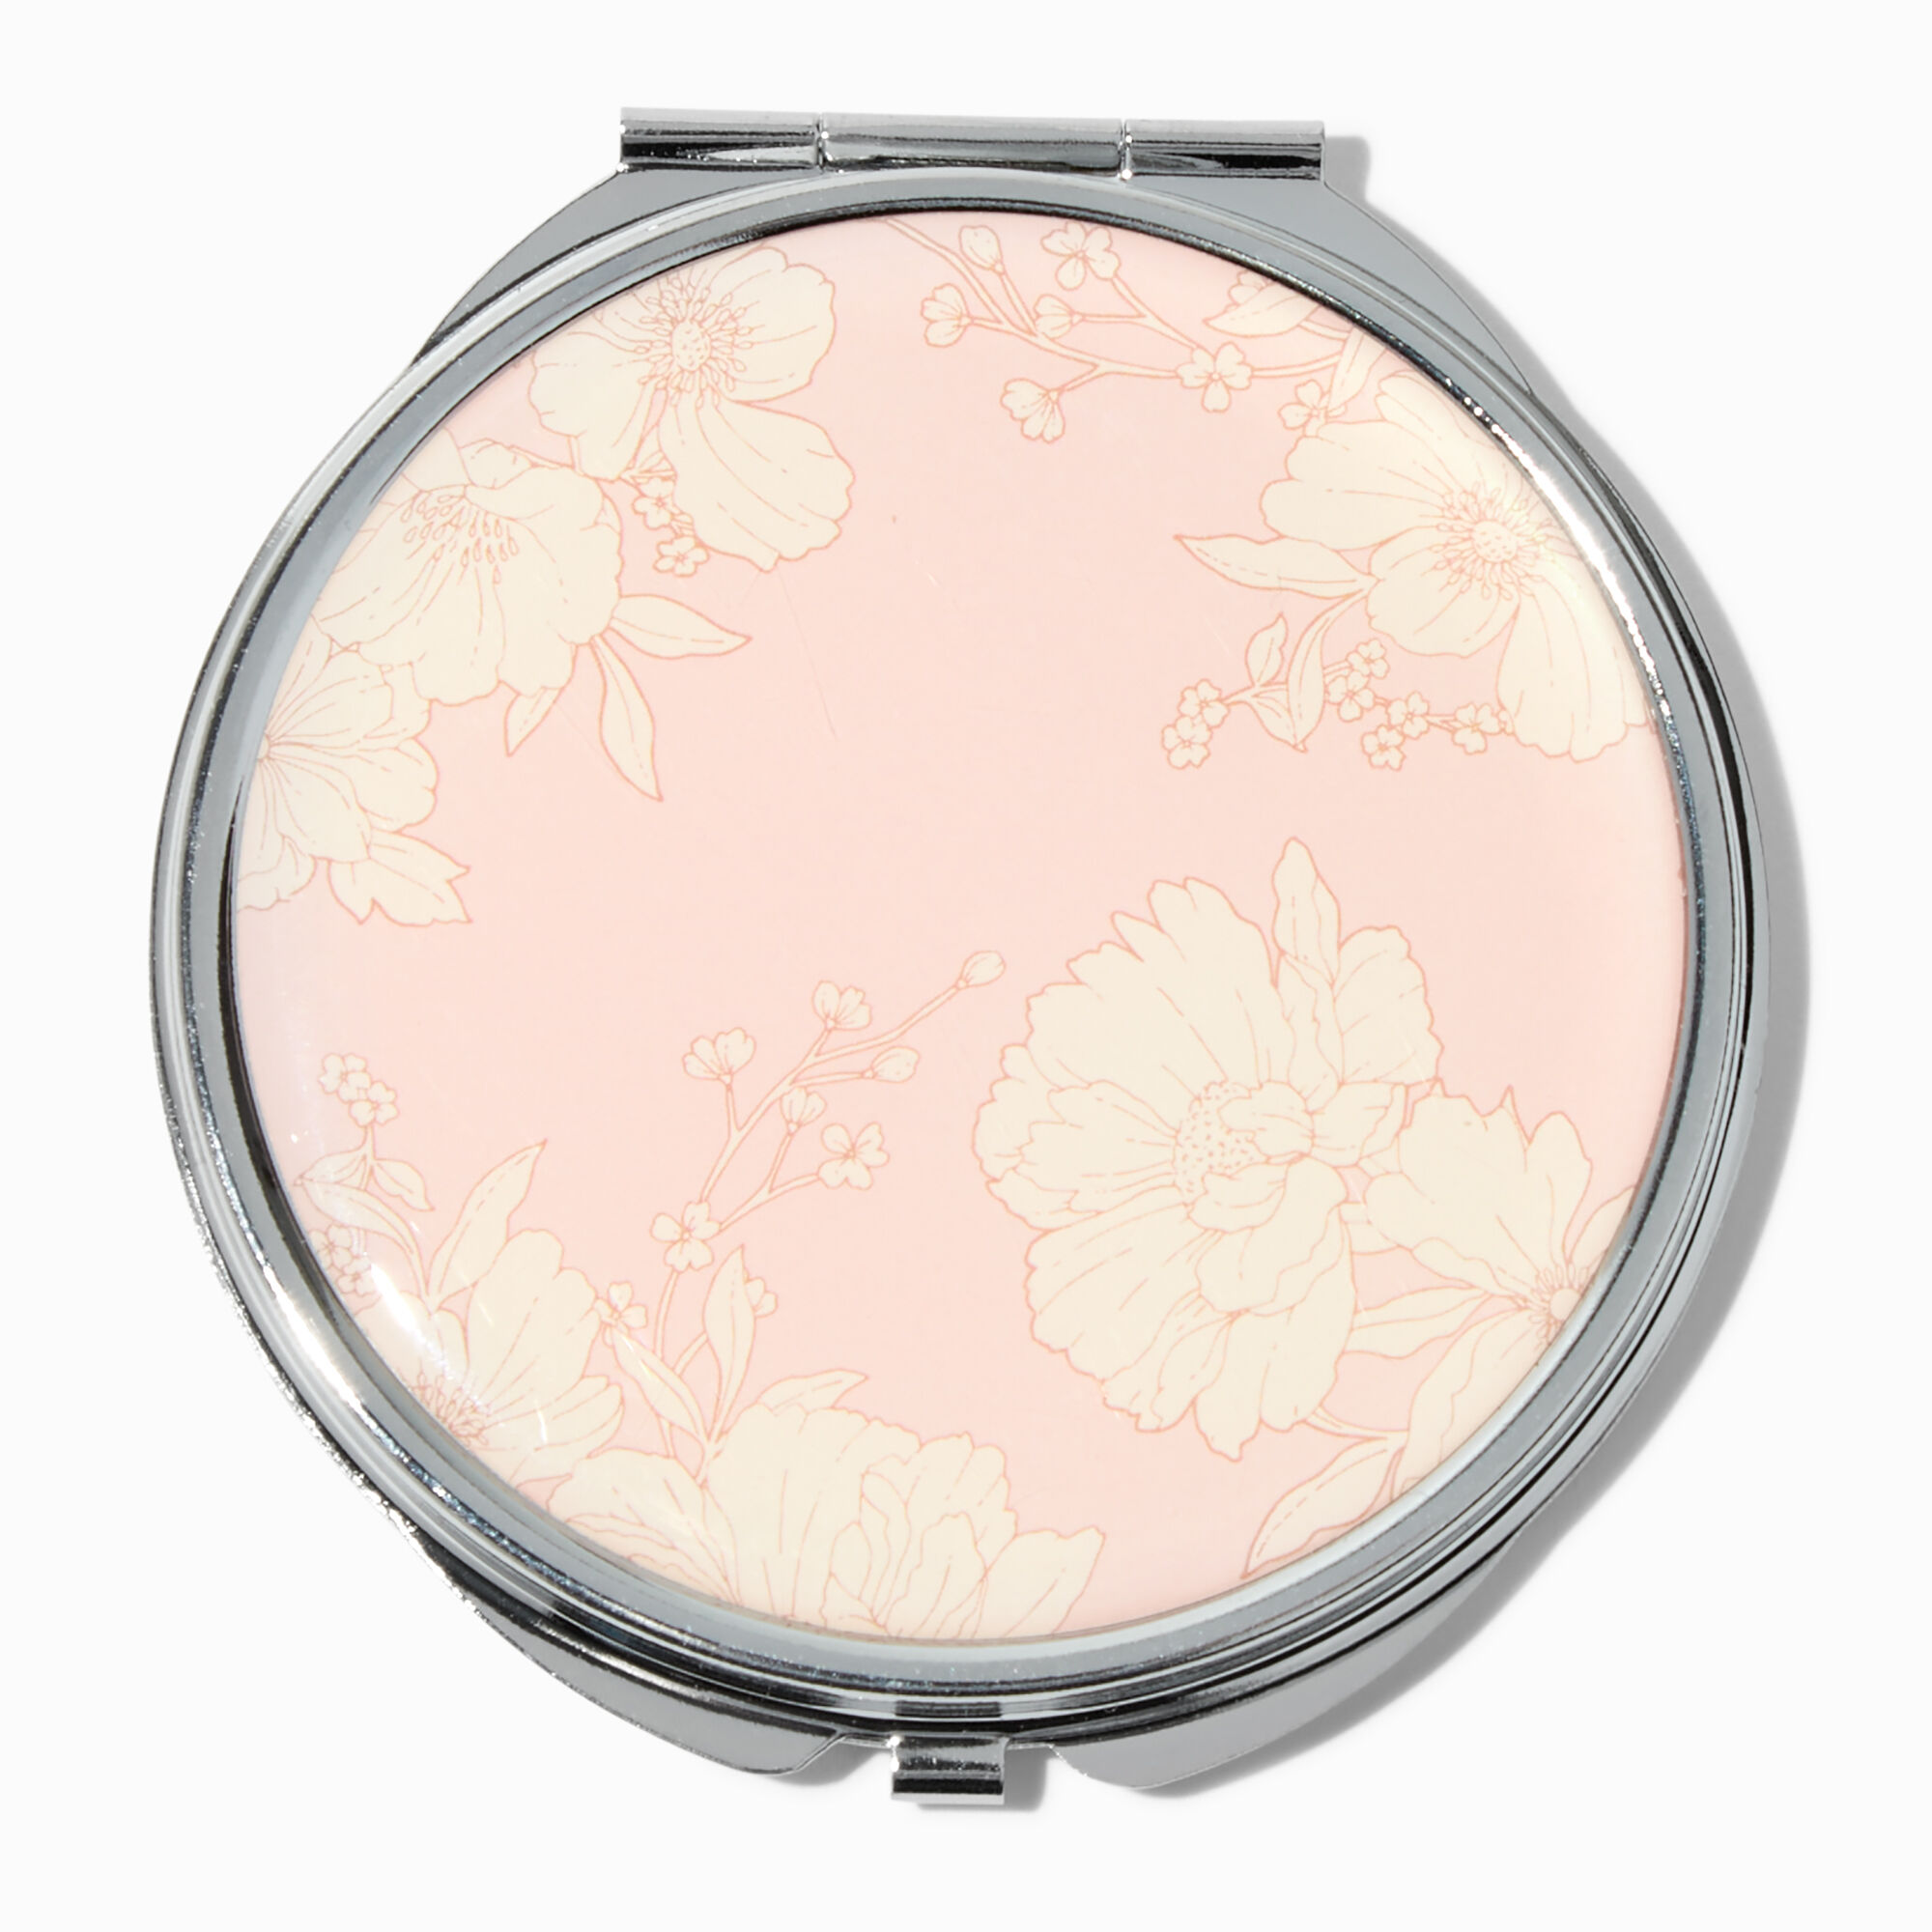 View Claires Spring Flower Compact Mirror Pink information